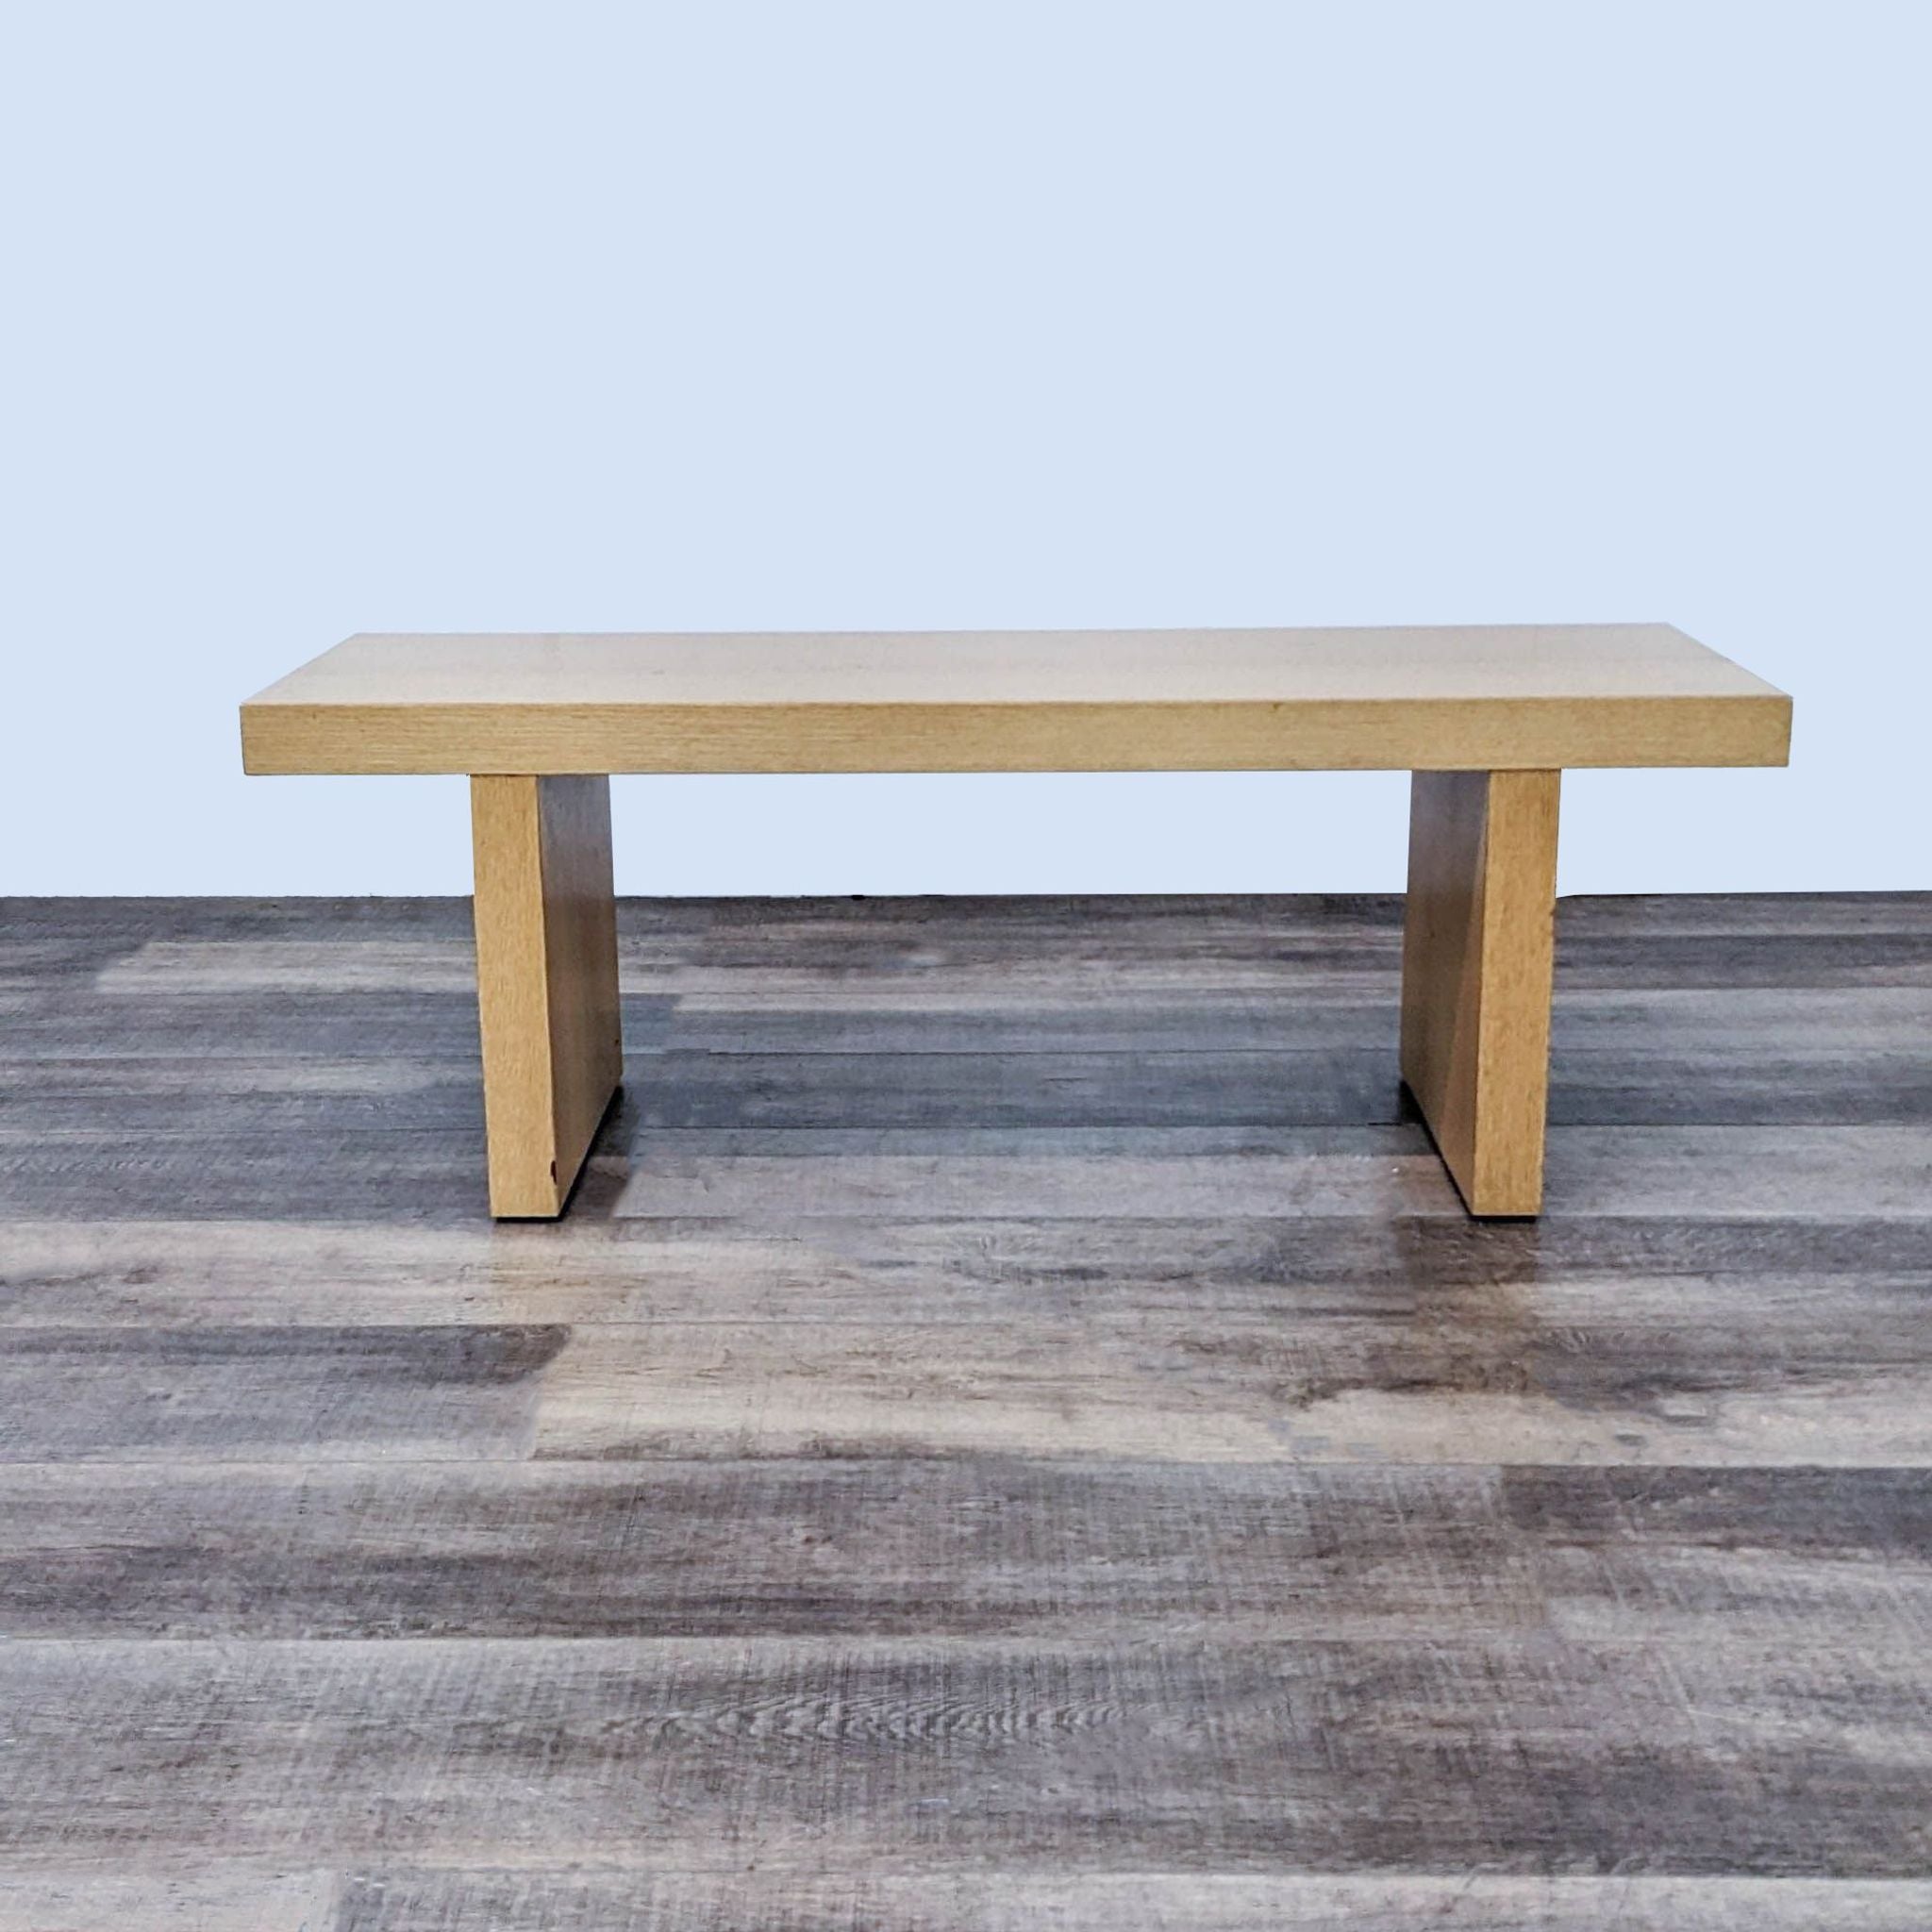 Reperch brand modern beech-colored bench with a clean silhouette, placed on a wooden floor.